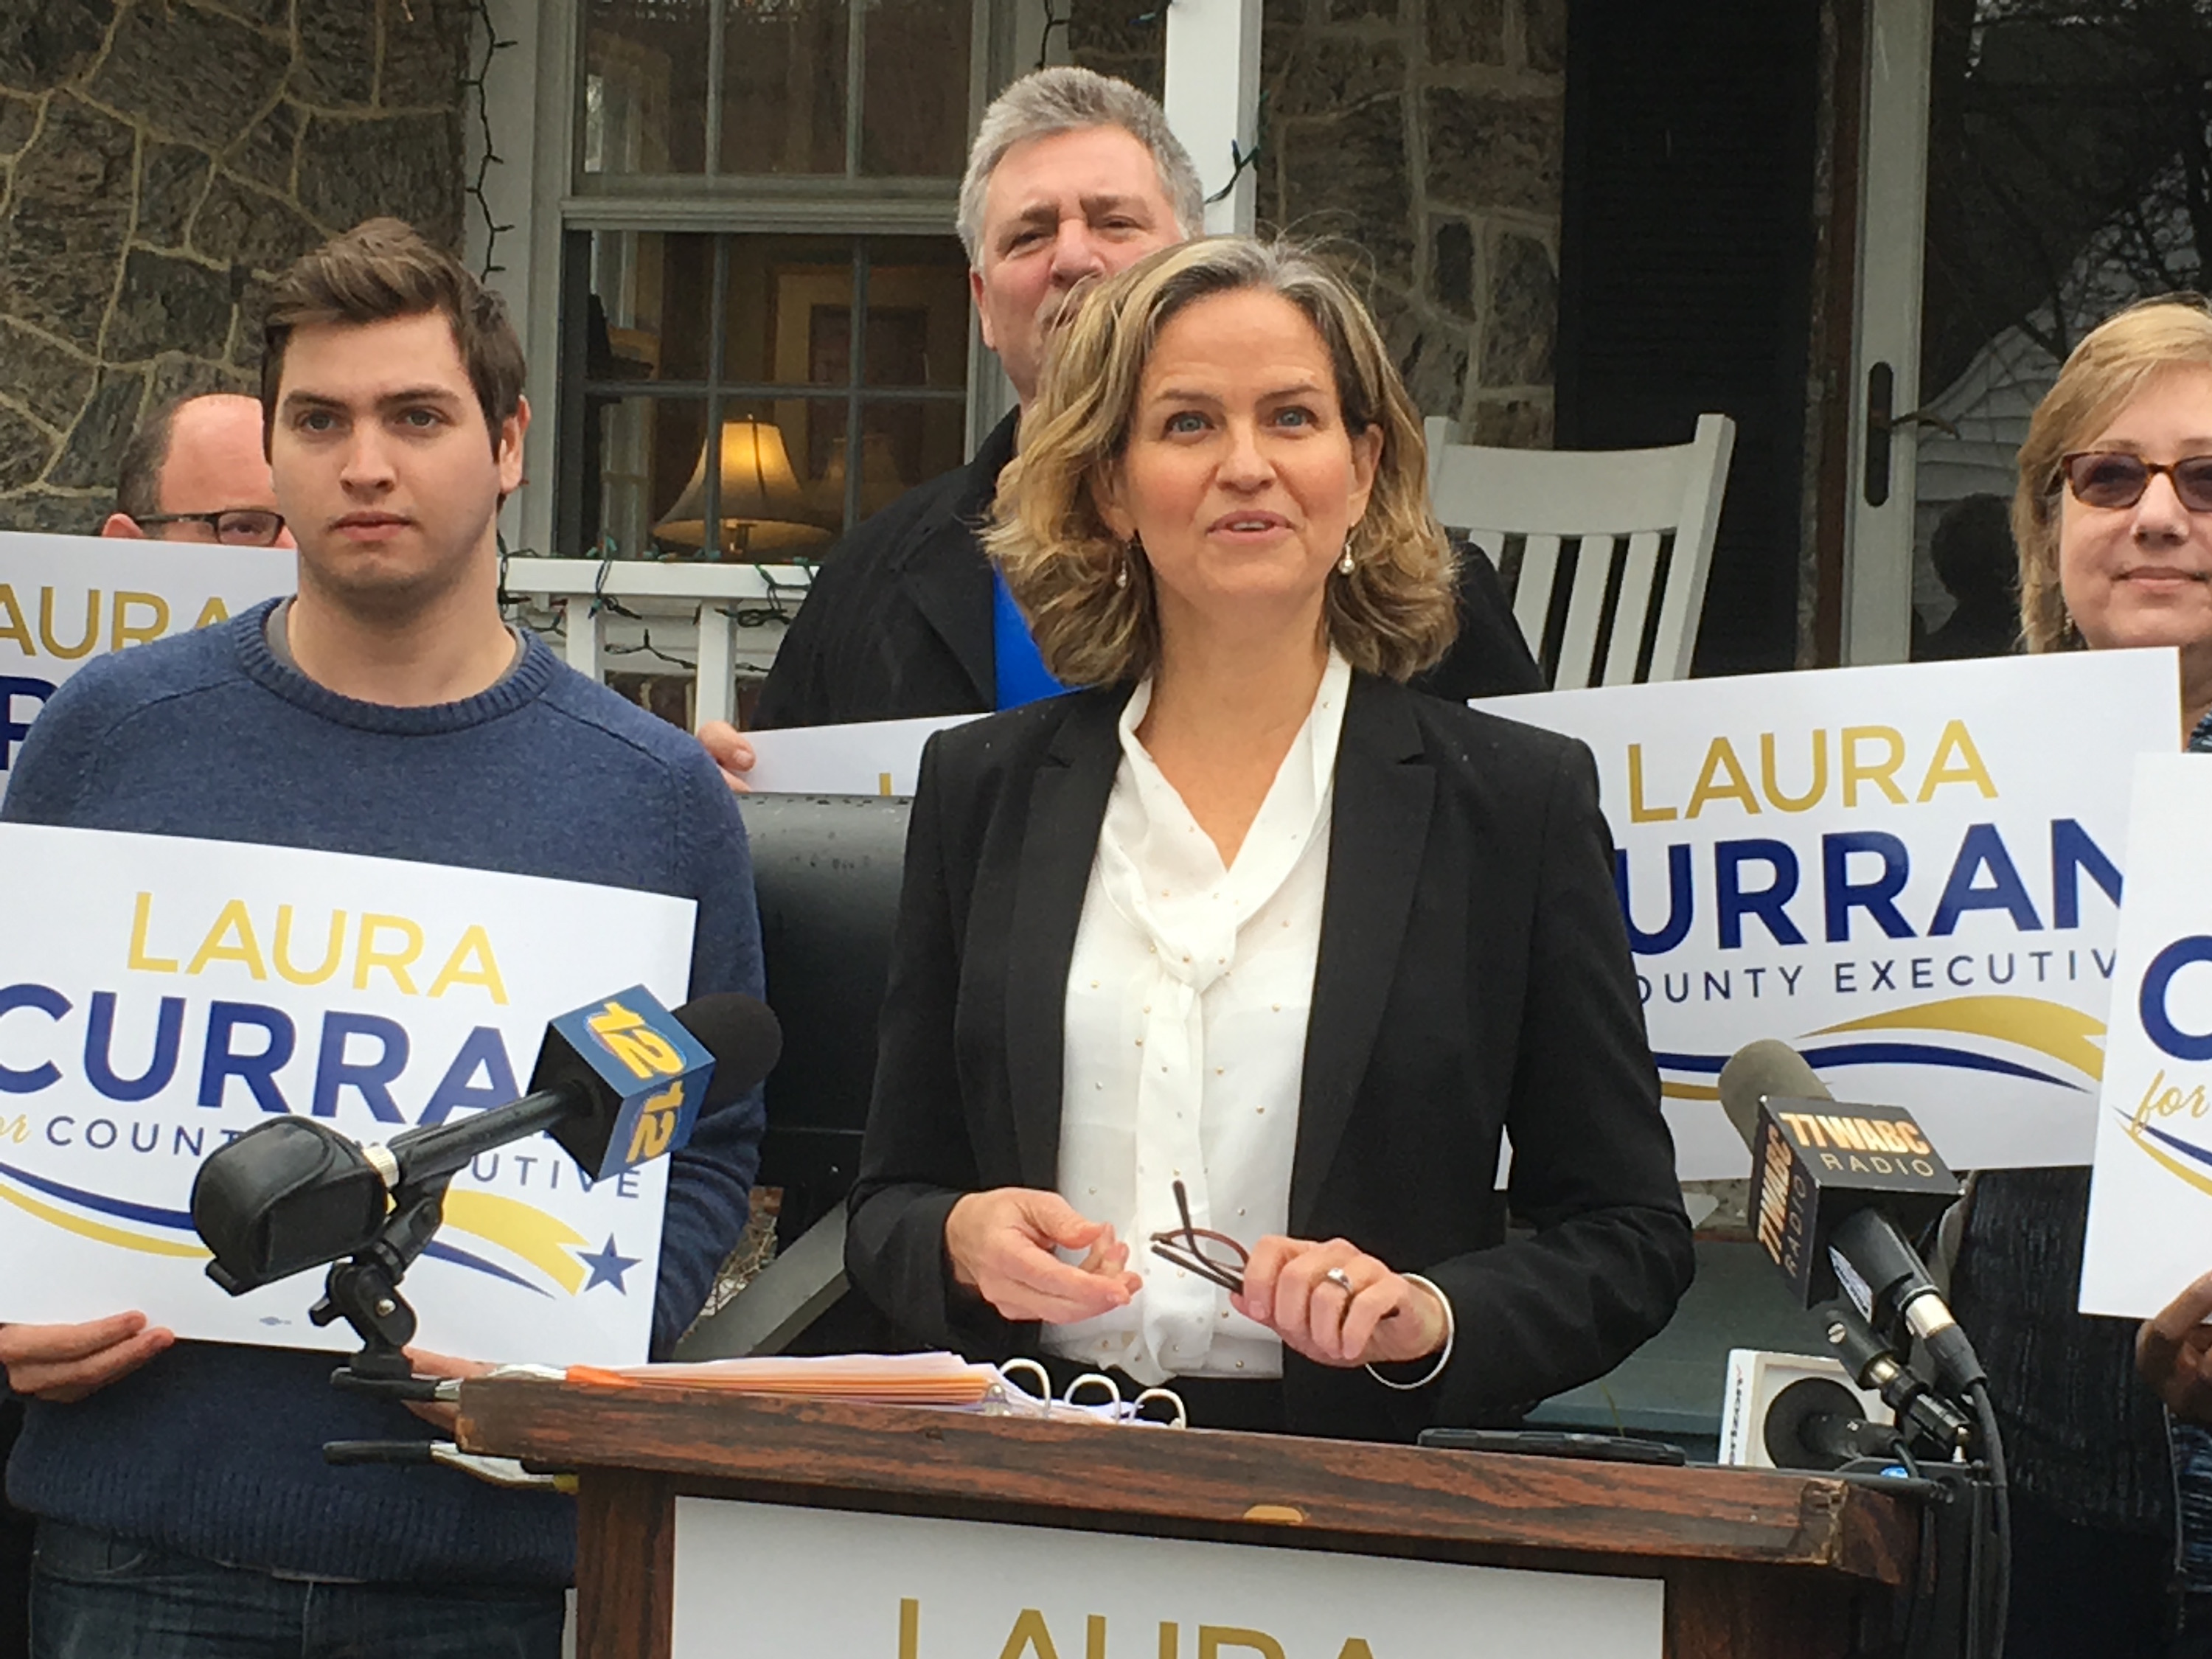 Laura Curran pledges to hire more women for county jobs